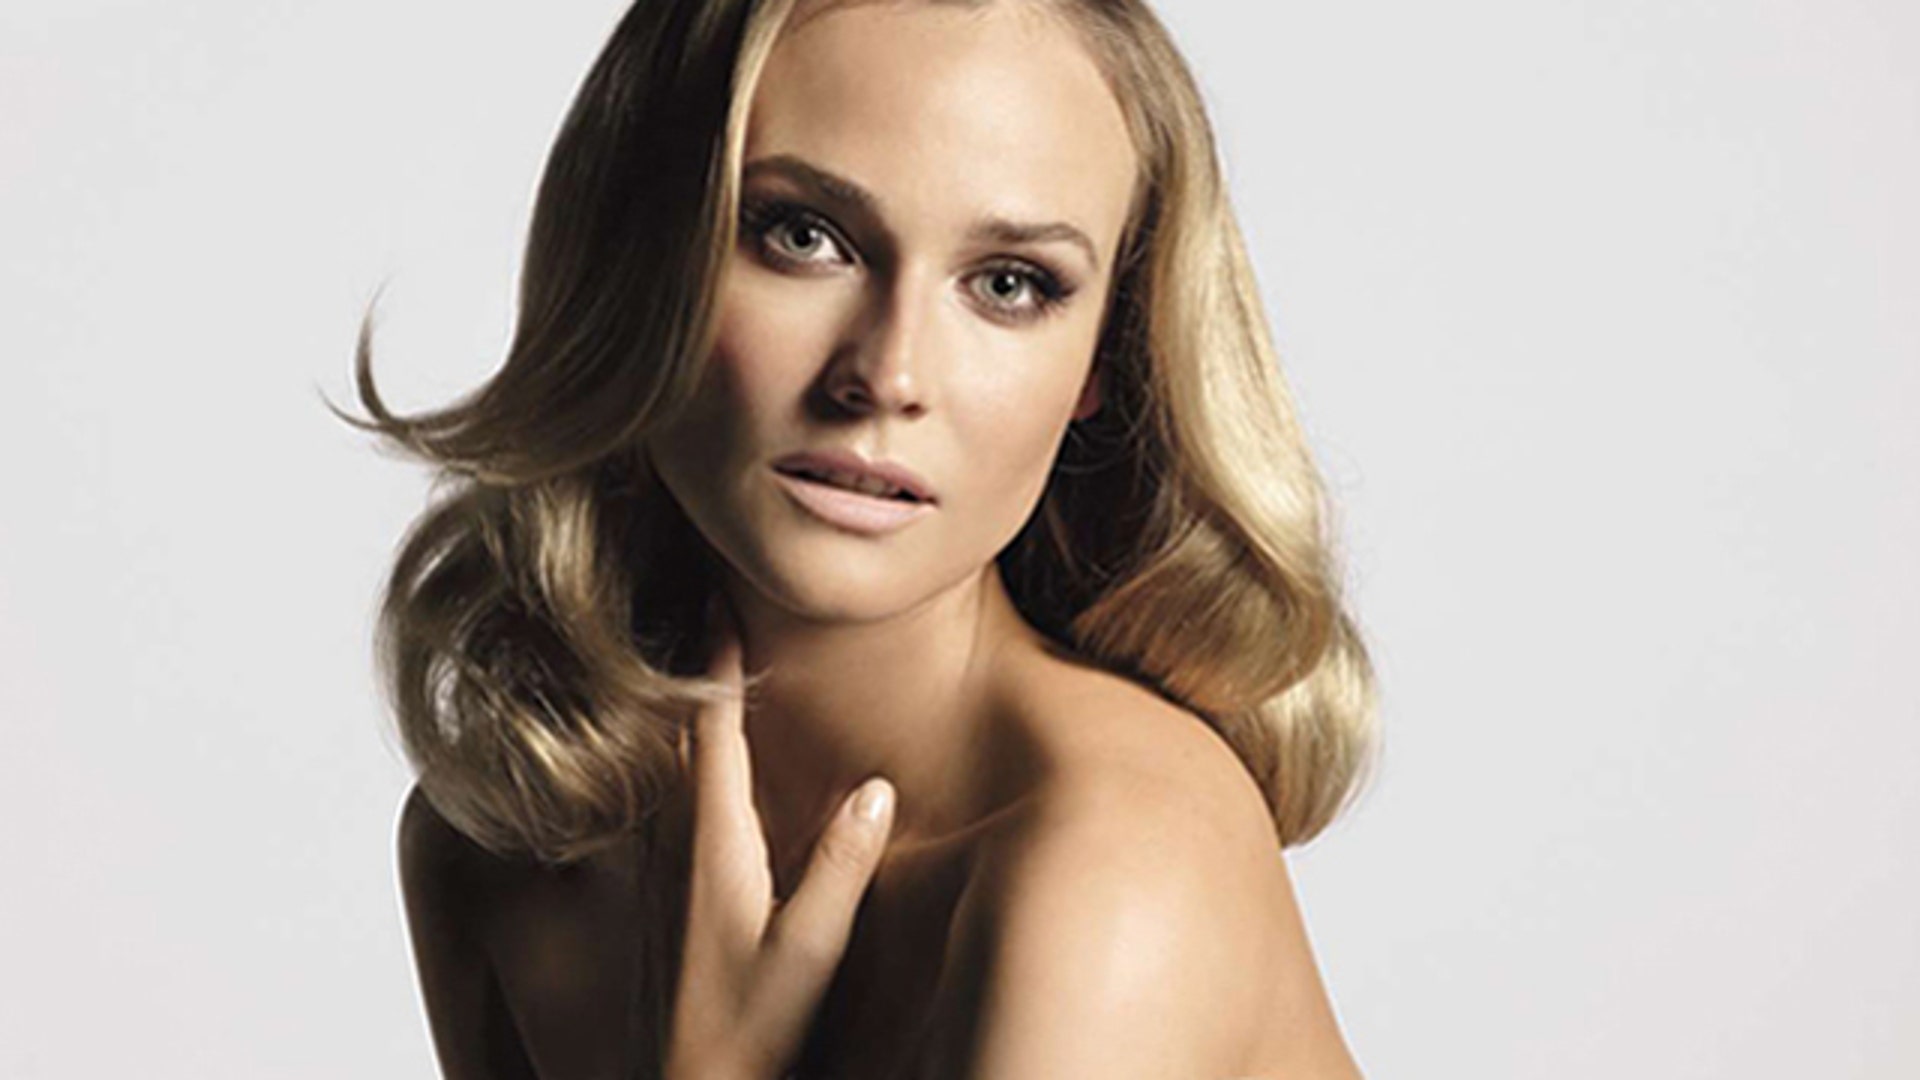 Diane Kruger plays the ultimate heiress as she graces the cover of